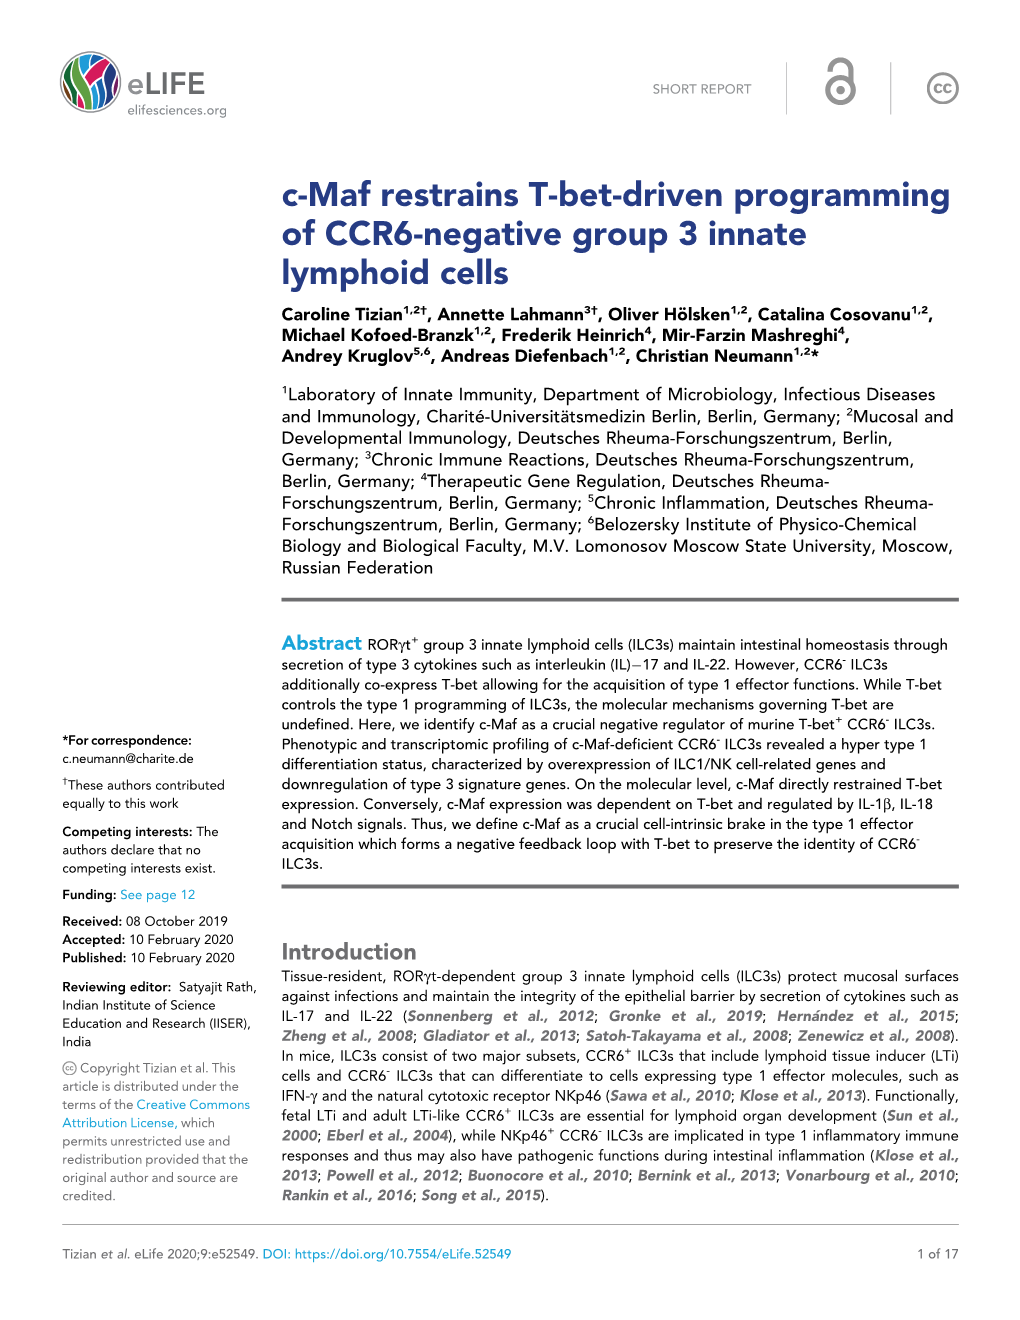 C-Maf Restrains T-Bet-Driven Programming of CCR6